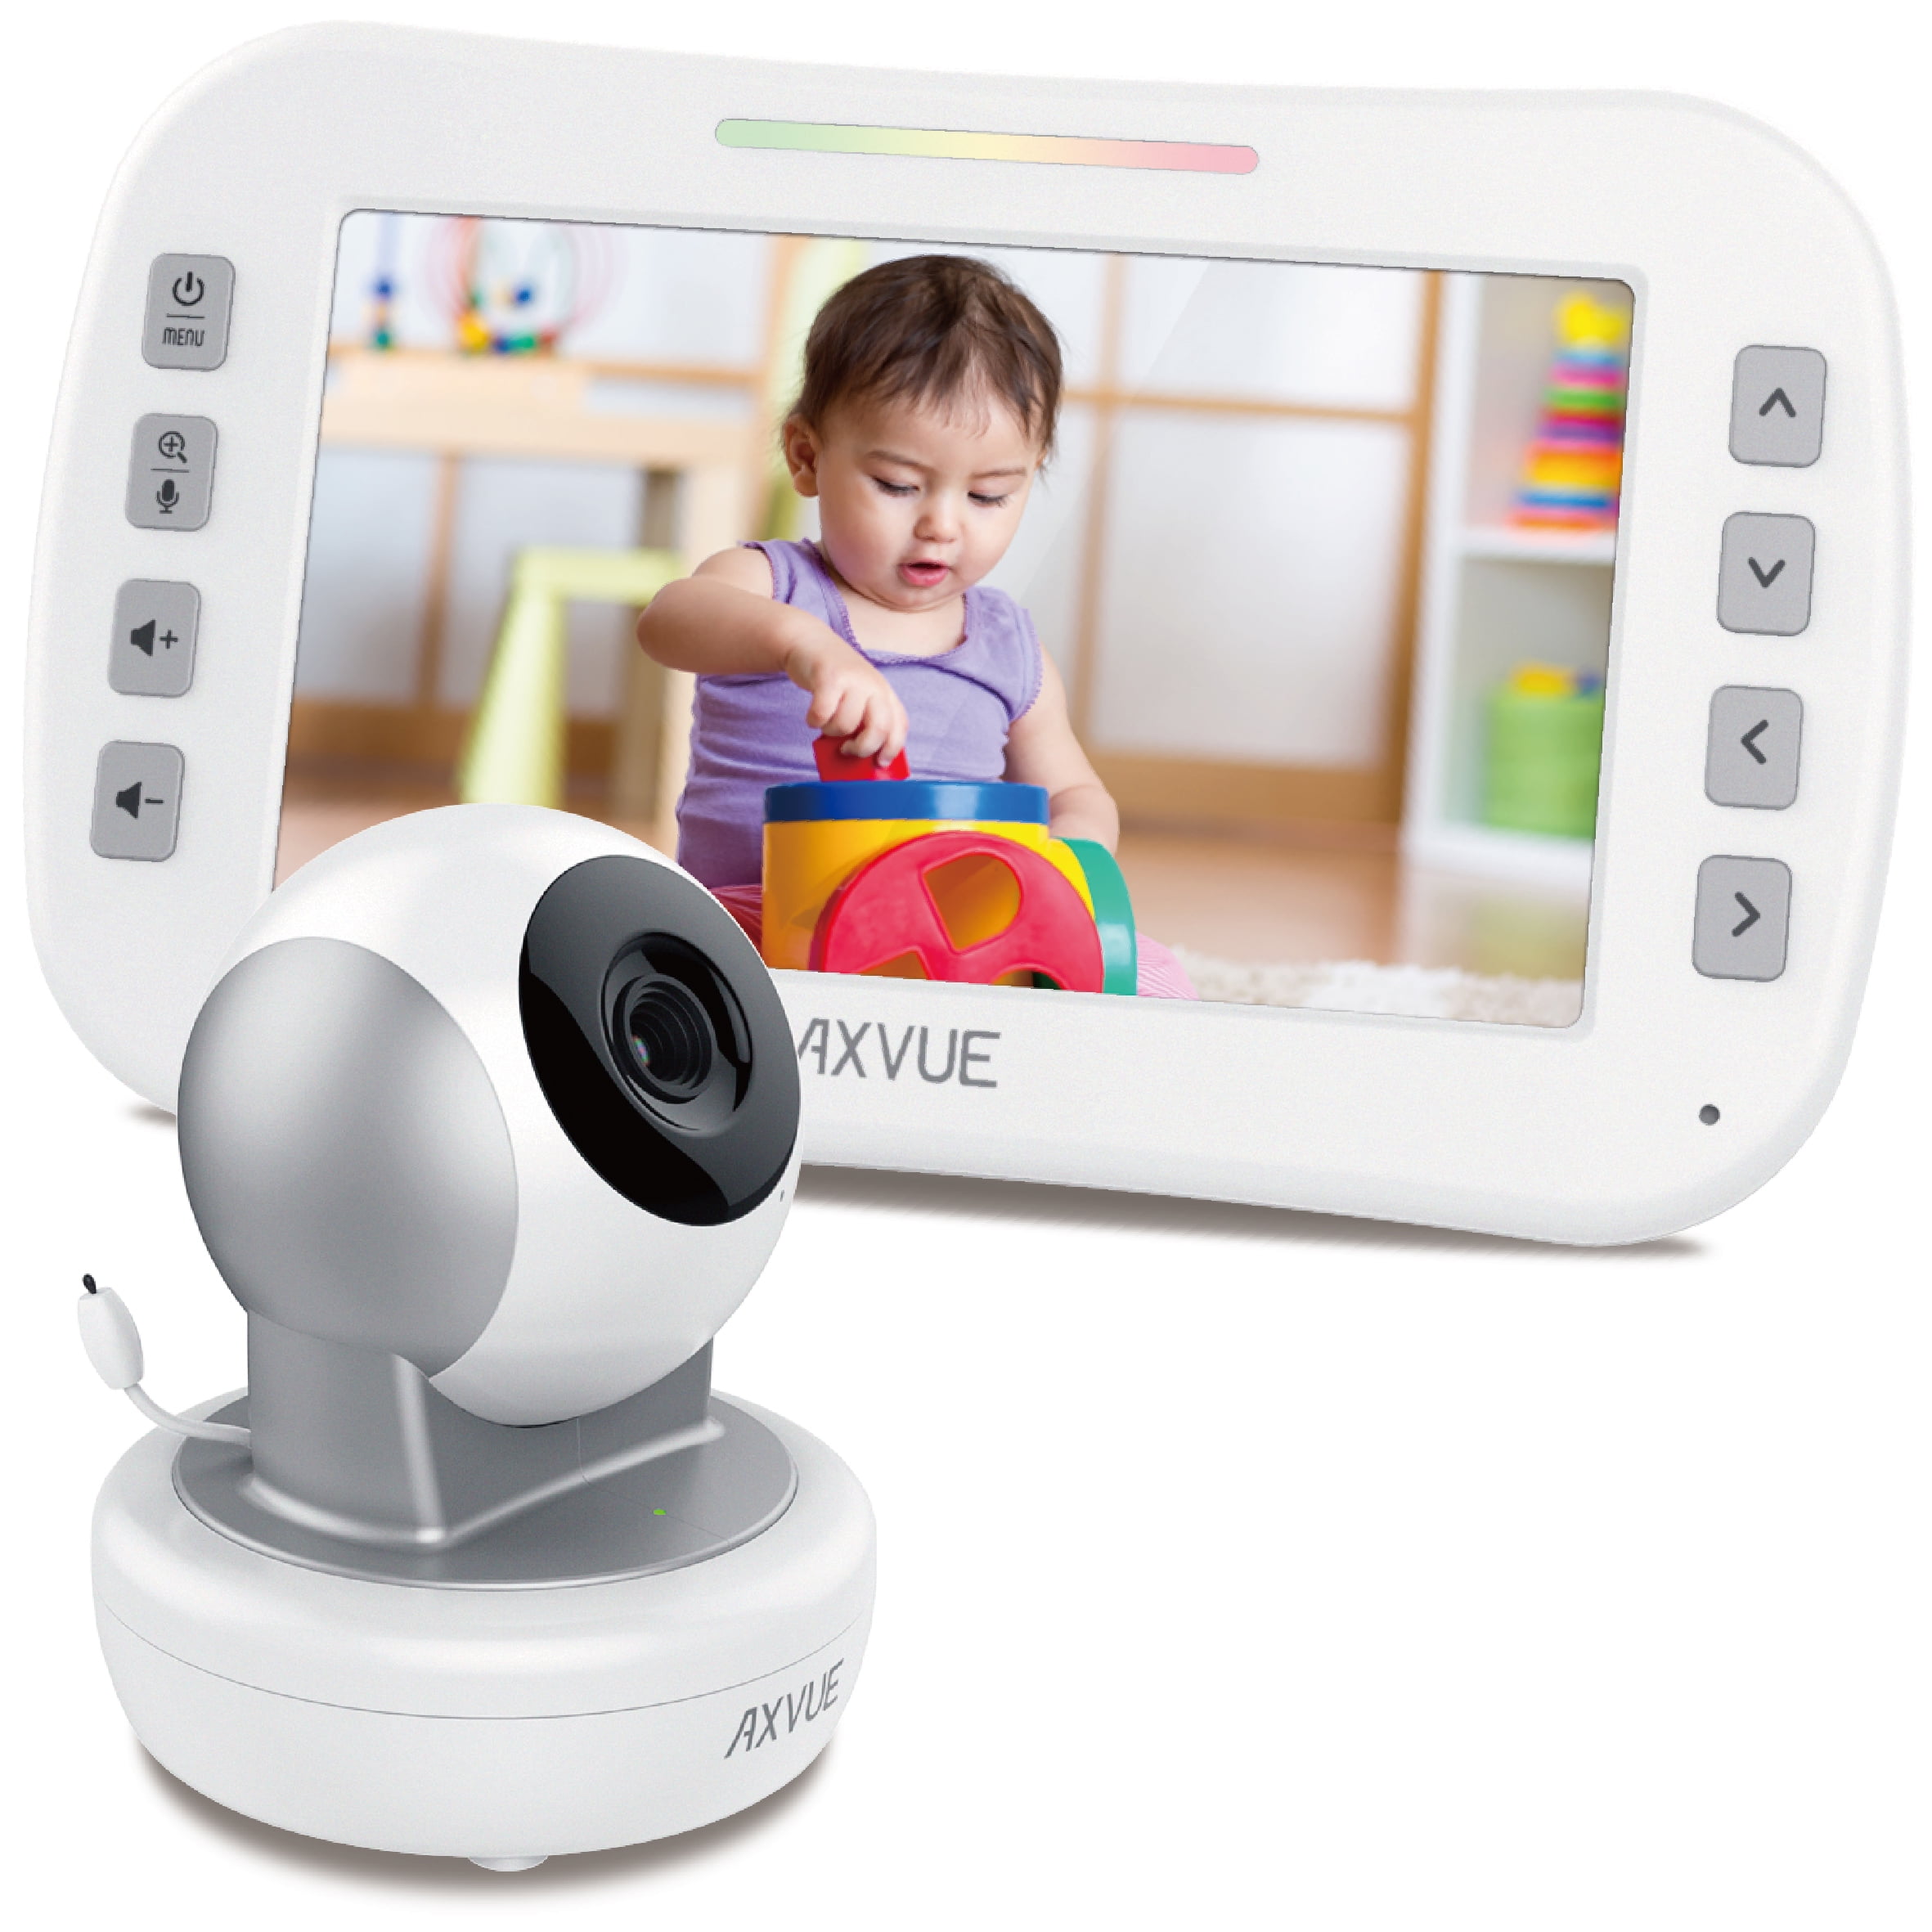 NEW UNIT Axvue E660 Video Baby Monitor 2.4" LCD Screen and 1 Camera 